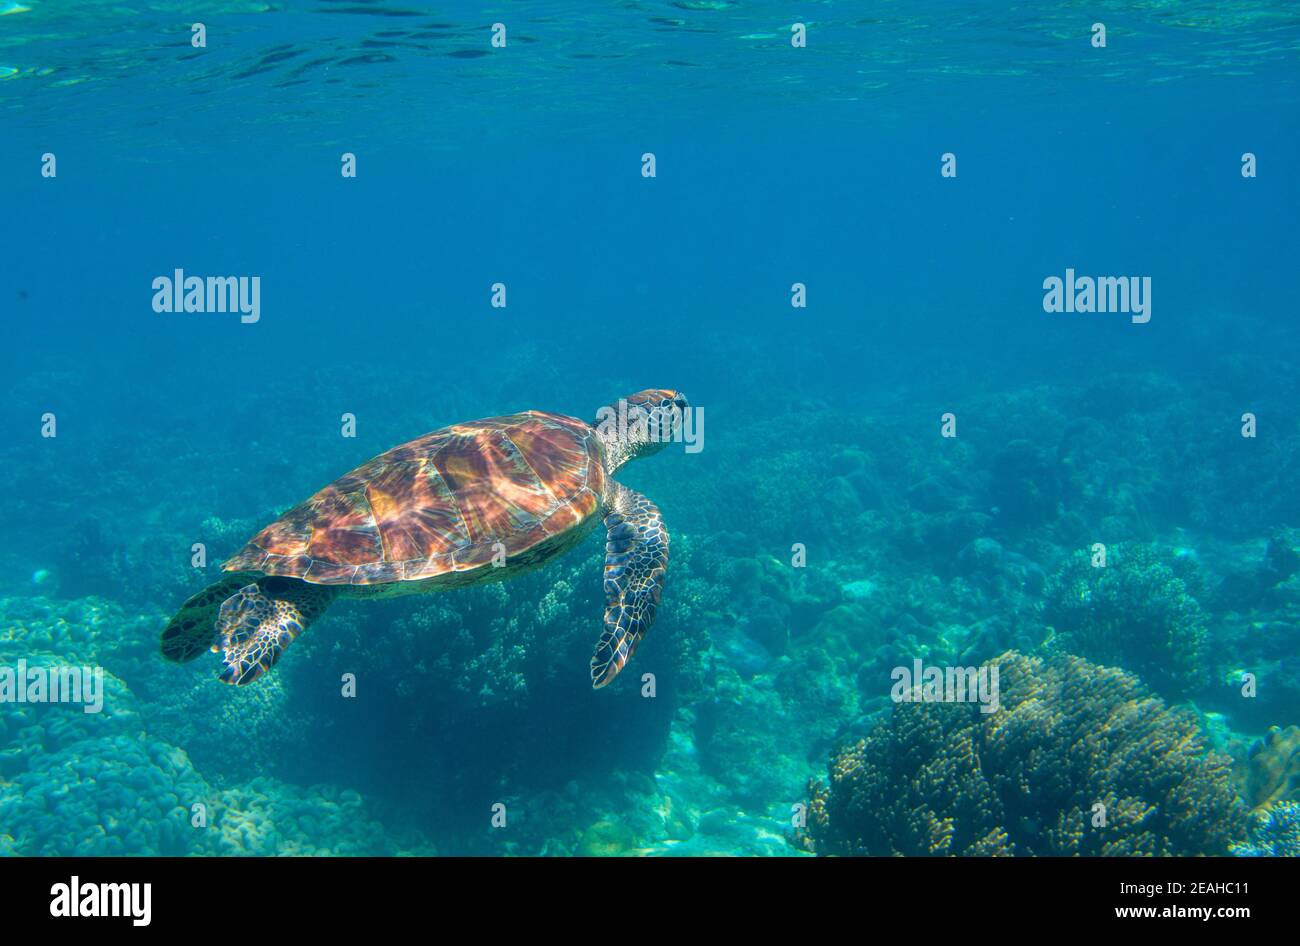 Cute sea turtle in blue water of tropical sea. Green turtle underwater photo. Wild marine animal in natural environment. Endangered species of coral r Stock Photo